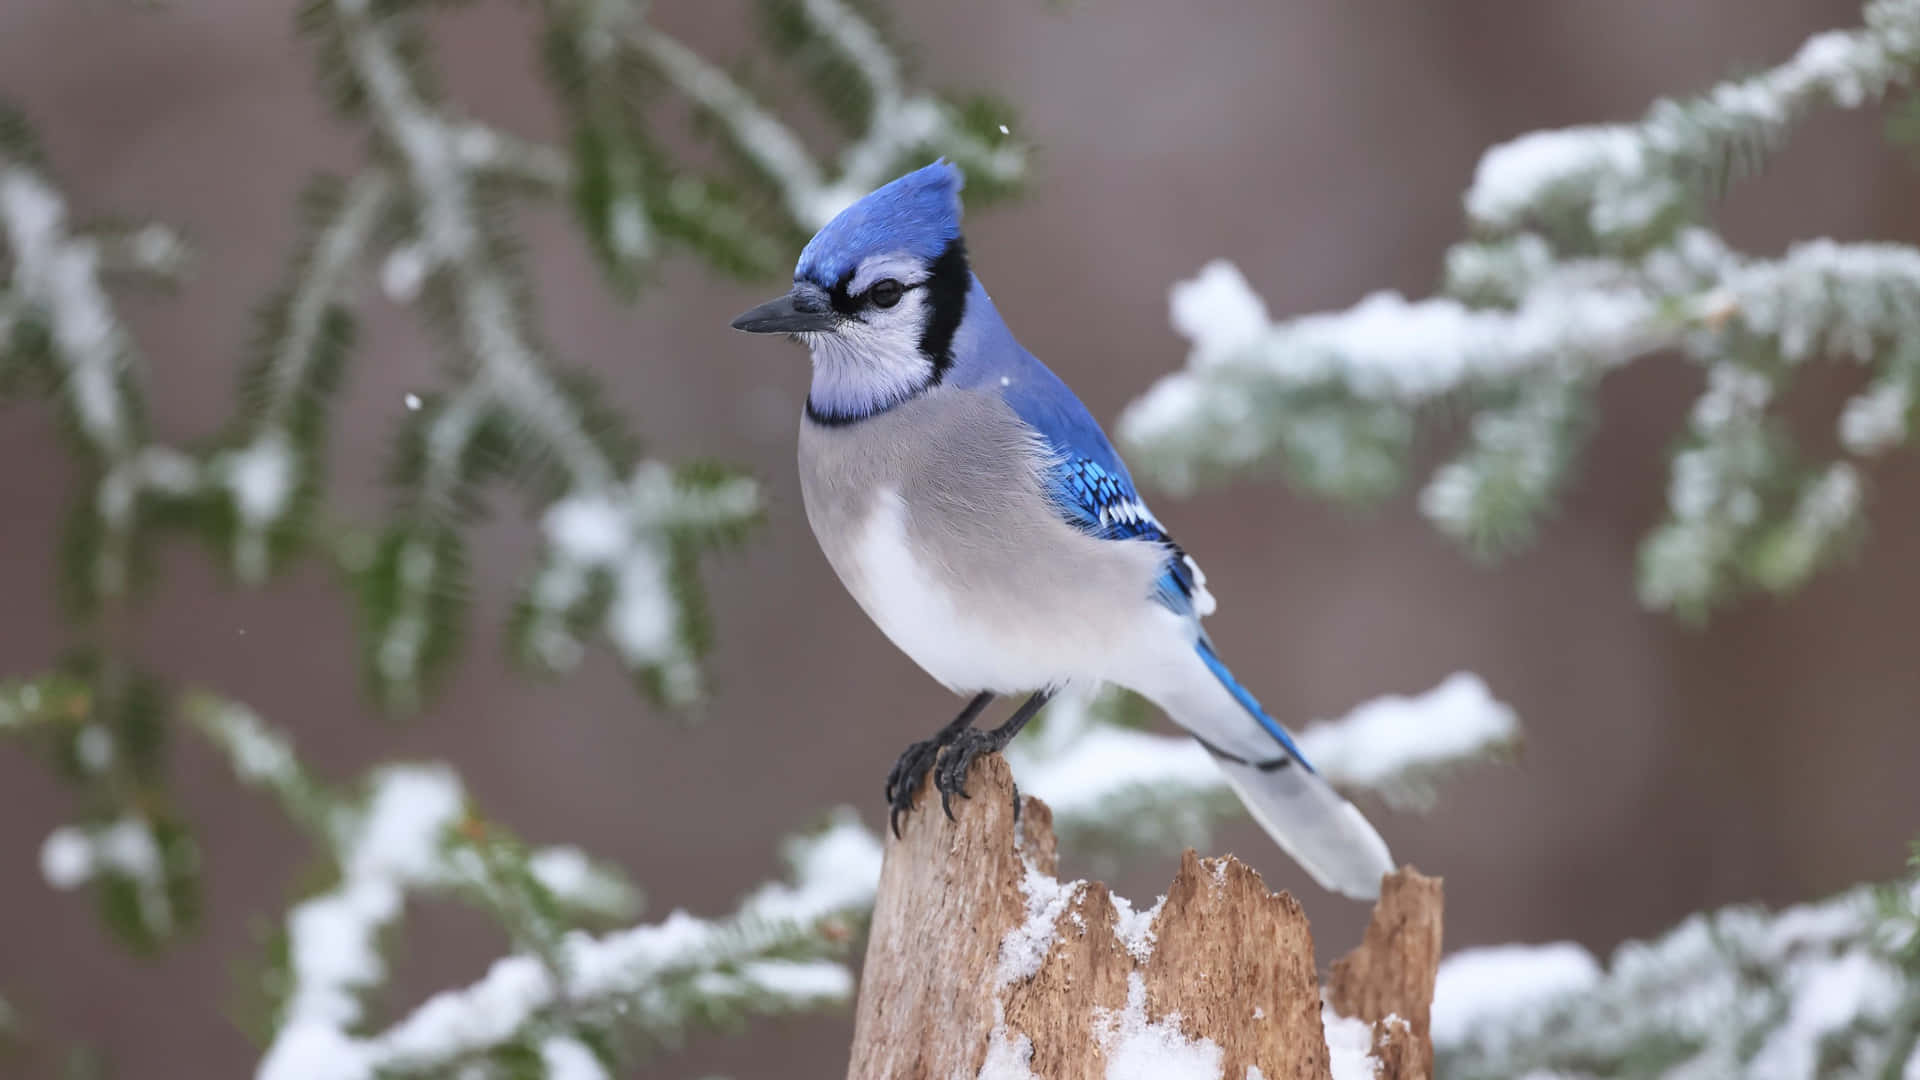 "This splendid Blue Jay perching on a tree branch is a sight that awakens the senses"